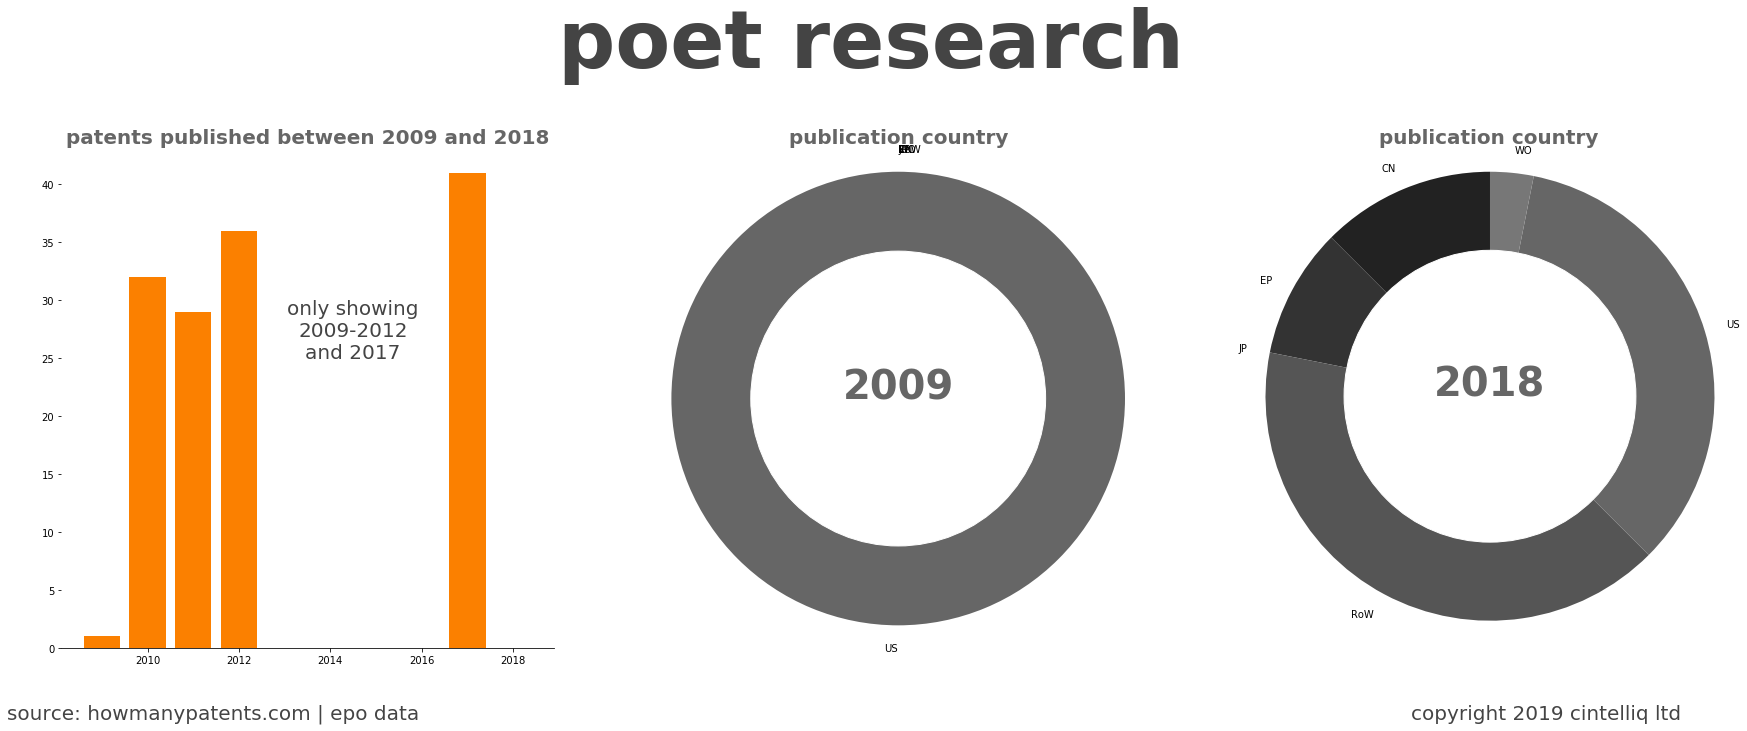 summary of patents for Poet Research